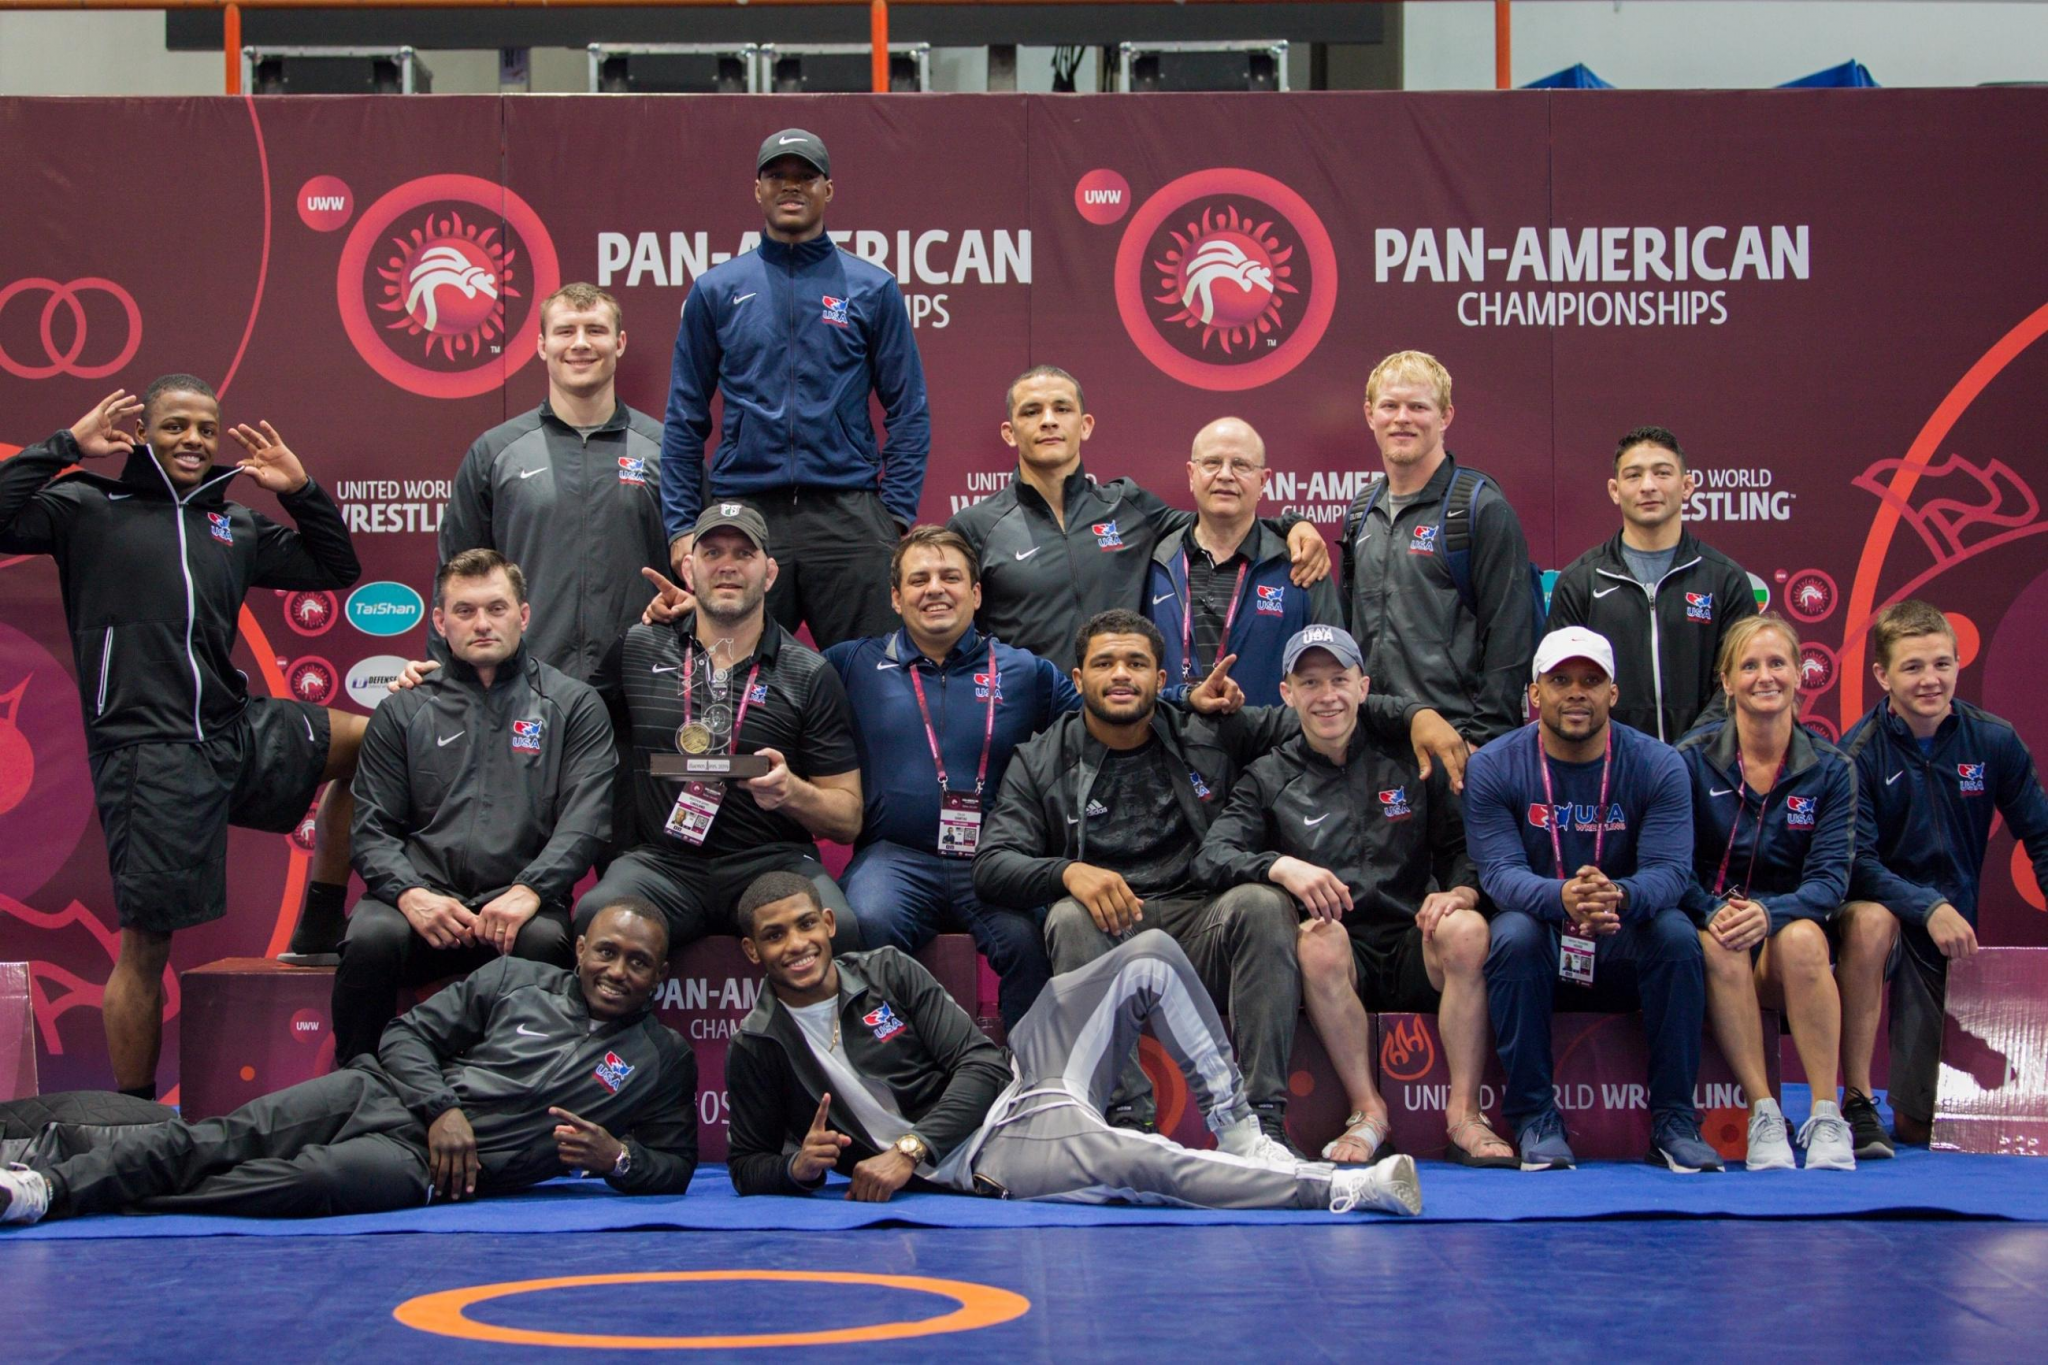 United States enjoy further gold medal success at Pan American Wrestling Championships